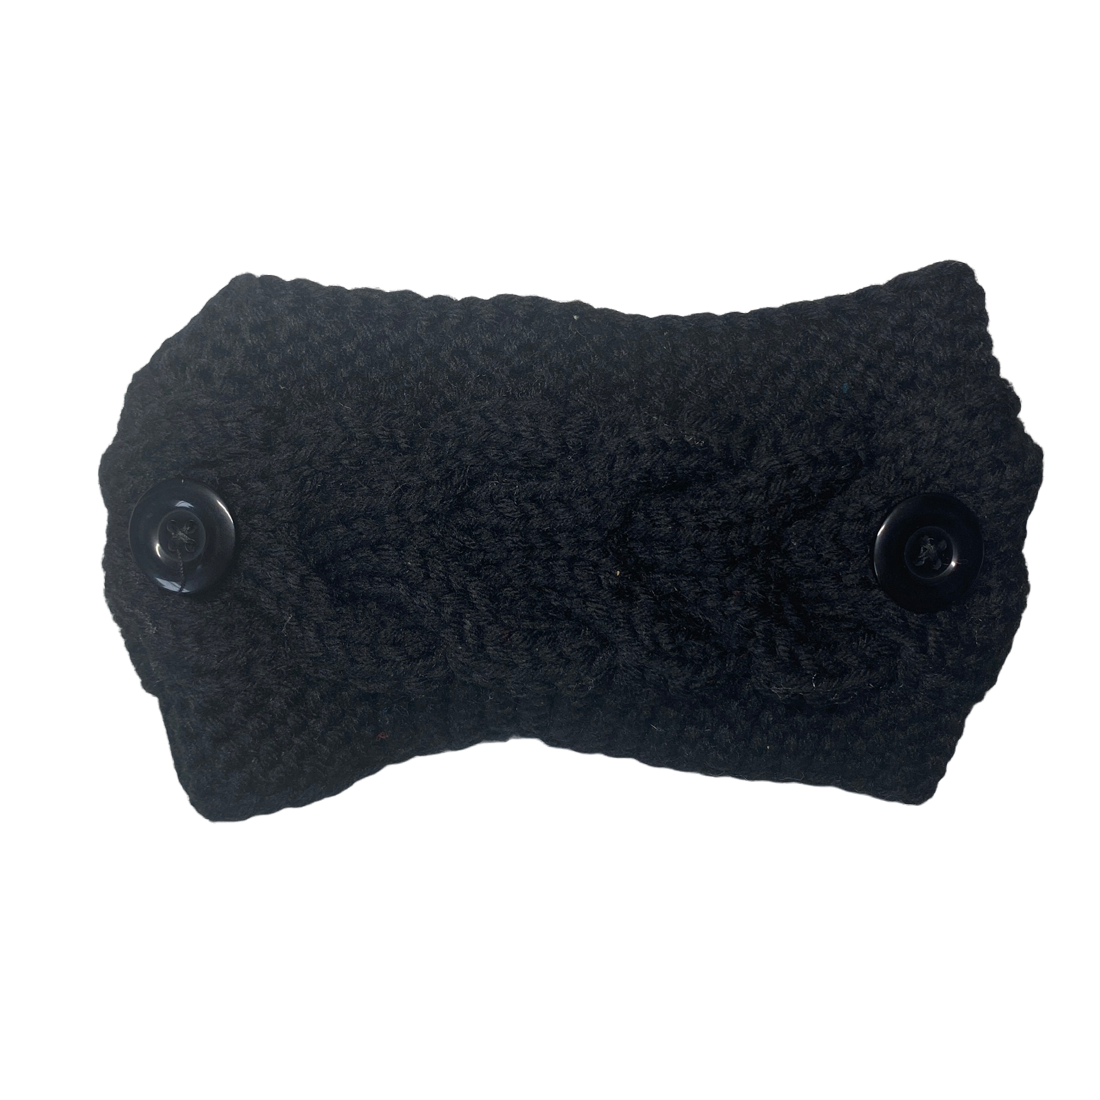 Knitted Headband with Buttons Mask SPIRIT SPARKPLUGS Black  